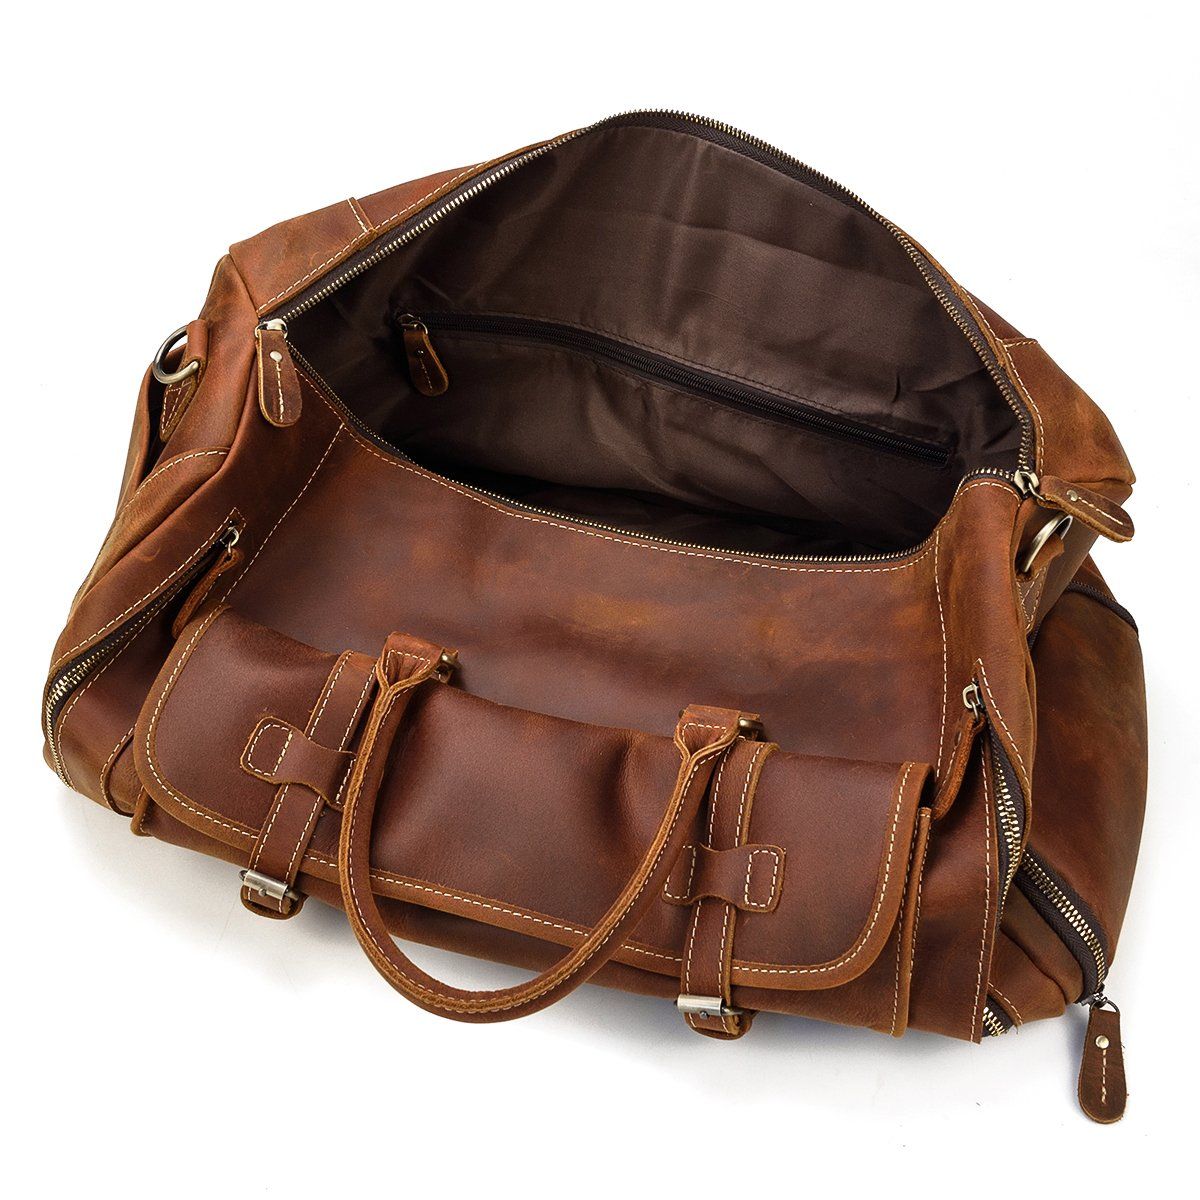 sturdy Men's Leather Weekend Bag